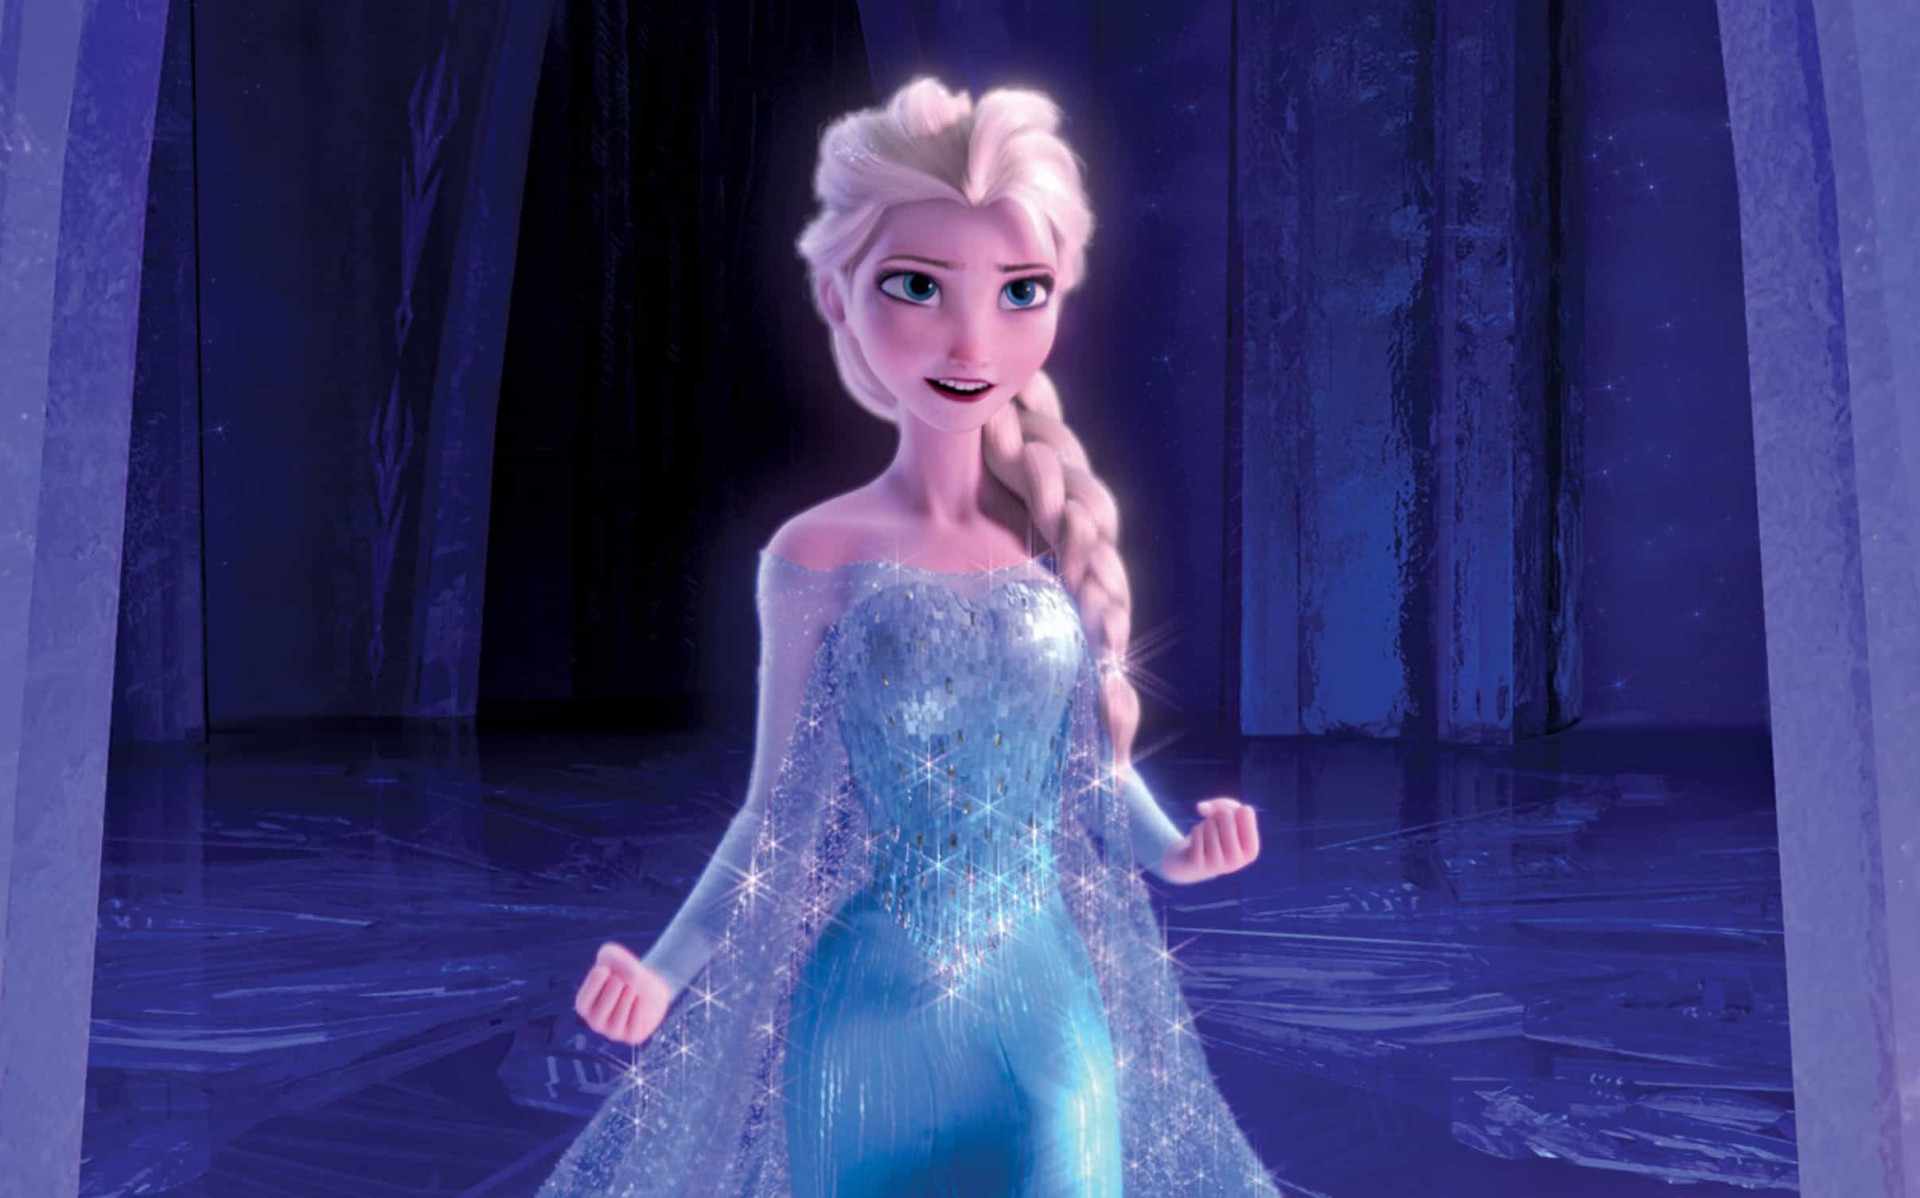 <p>'Frozen' (2013) was a huge hit, and 'Let It Go' was one of the reasons behind its success. The song is truly hair-raising, and can give kids a boost of confidence when dealing with difficult moments in their lives. </p><p><a href="https://www.msn.com/en-us/community/channel/vid-7xx8mnucu55yw63we9va2gwr7uihbxwc68fxqp25x6tg4ftibpra?cvid=94631541bc0f4f89bfd59158d696ad7e">Follow us and access great exclusive content every day</a></p>